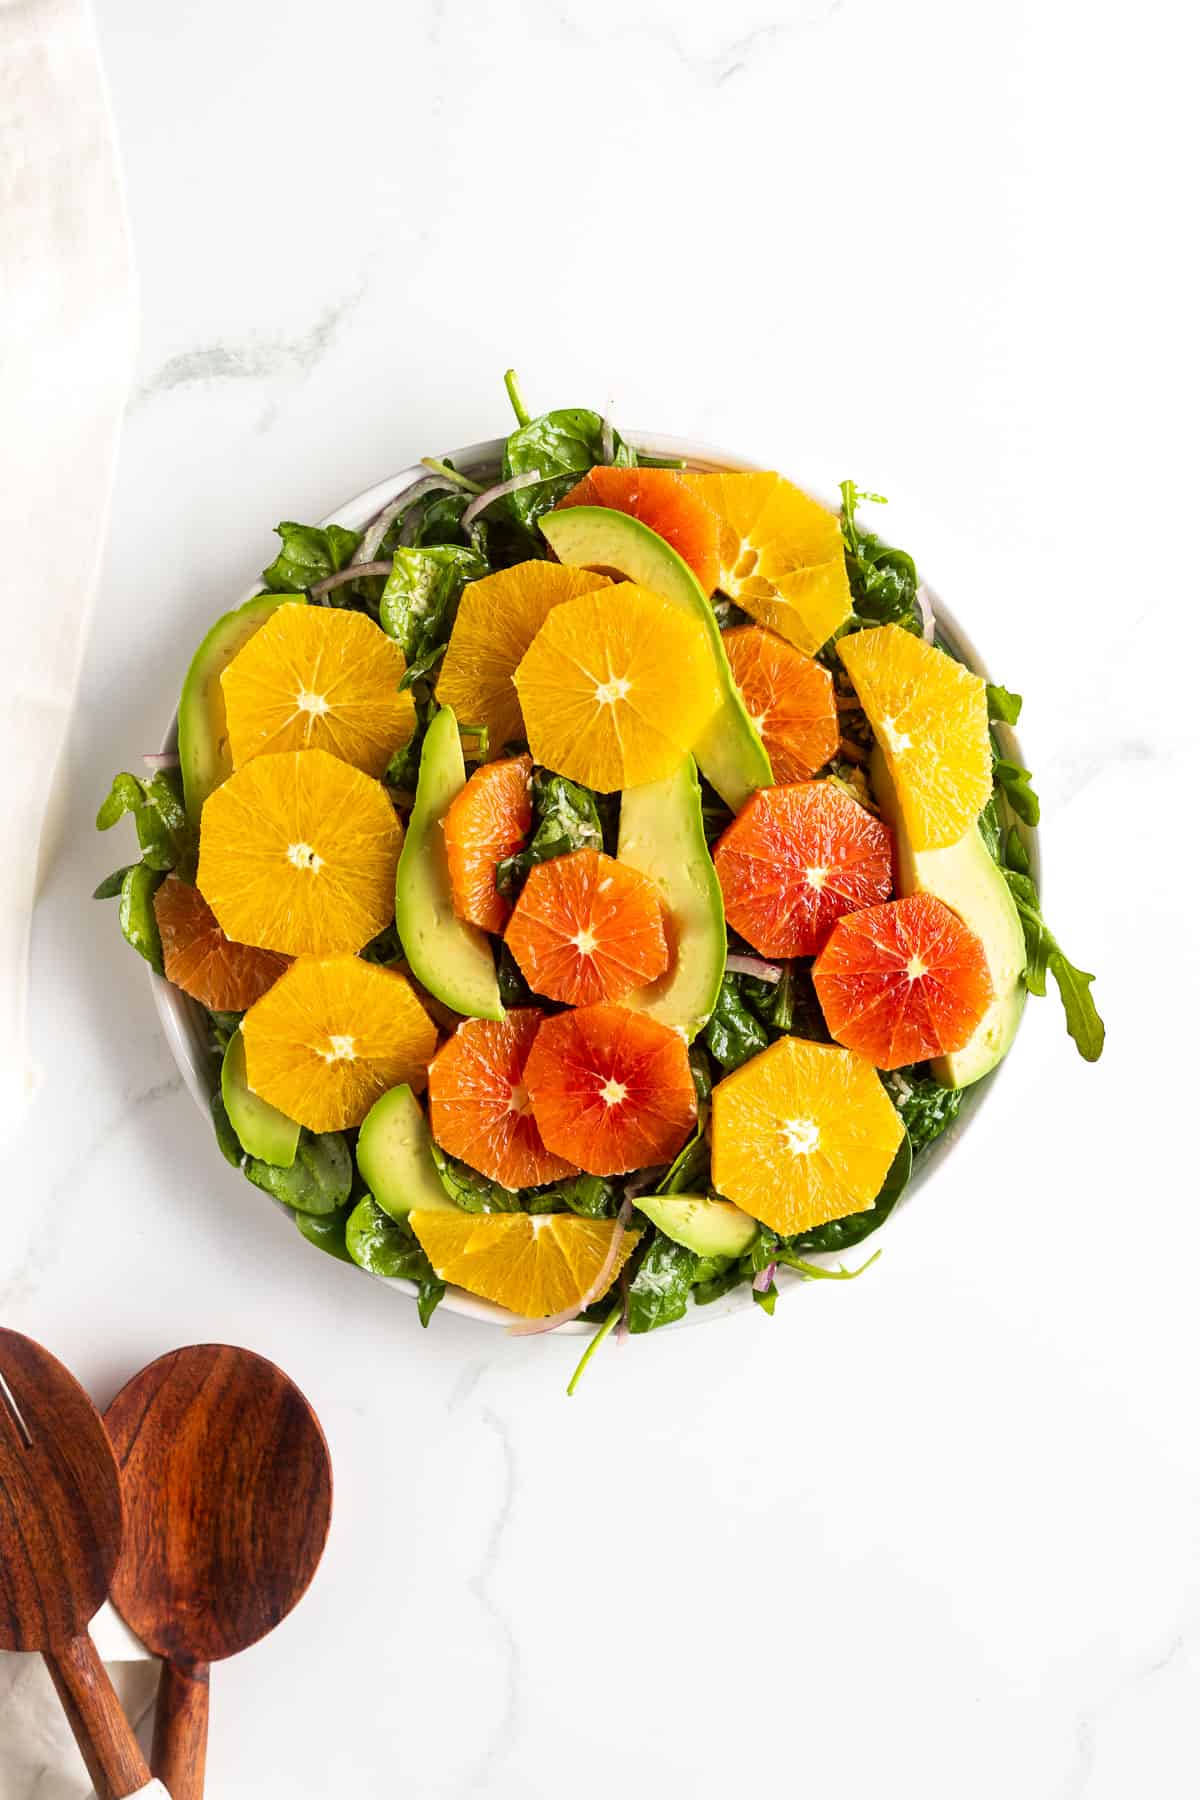 Oranges and avocado plated on salad greens.